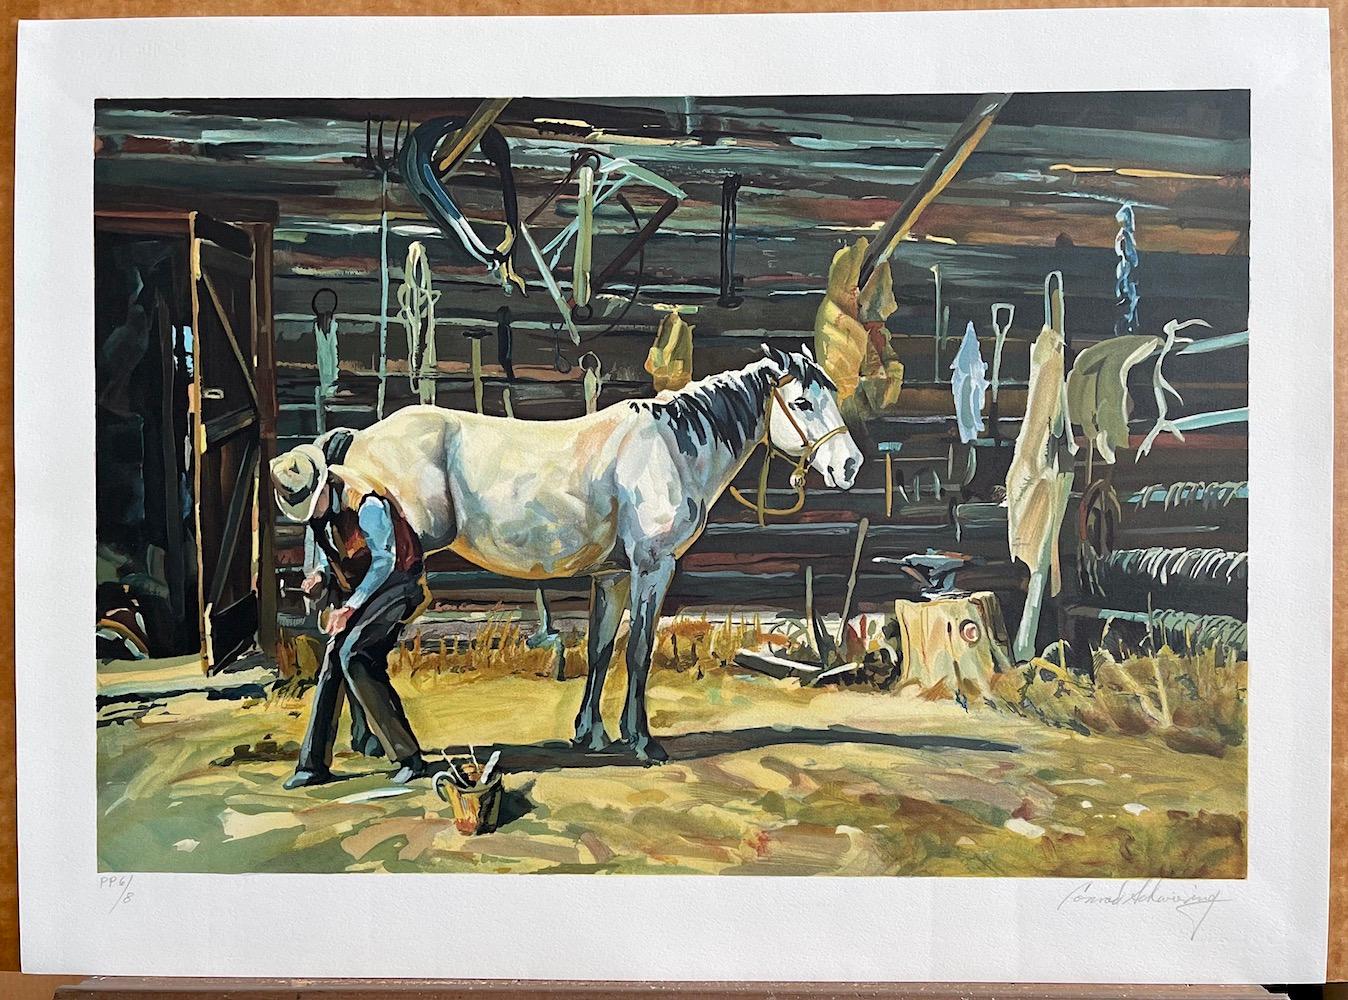 SHOE SHOP Signed Lithograph, Cowboy Farrier, Horseshoe, White Horse, Western Art - American Realist Print by Conrad Schwiering